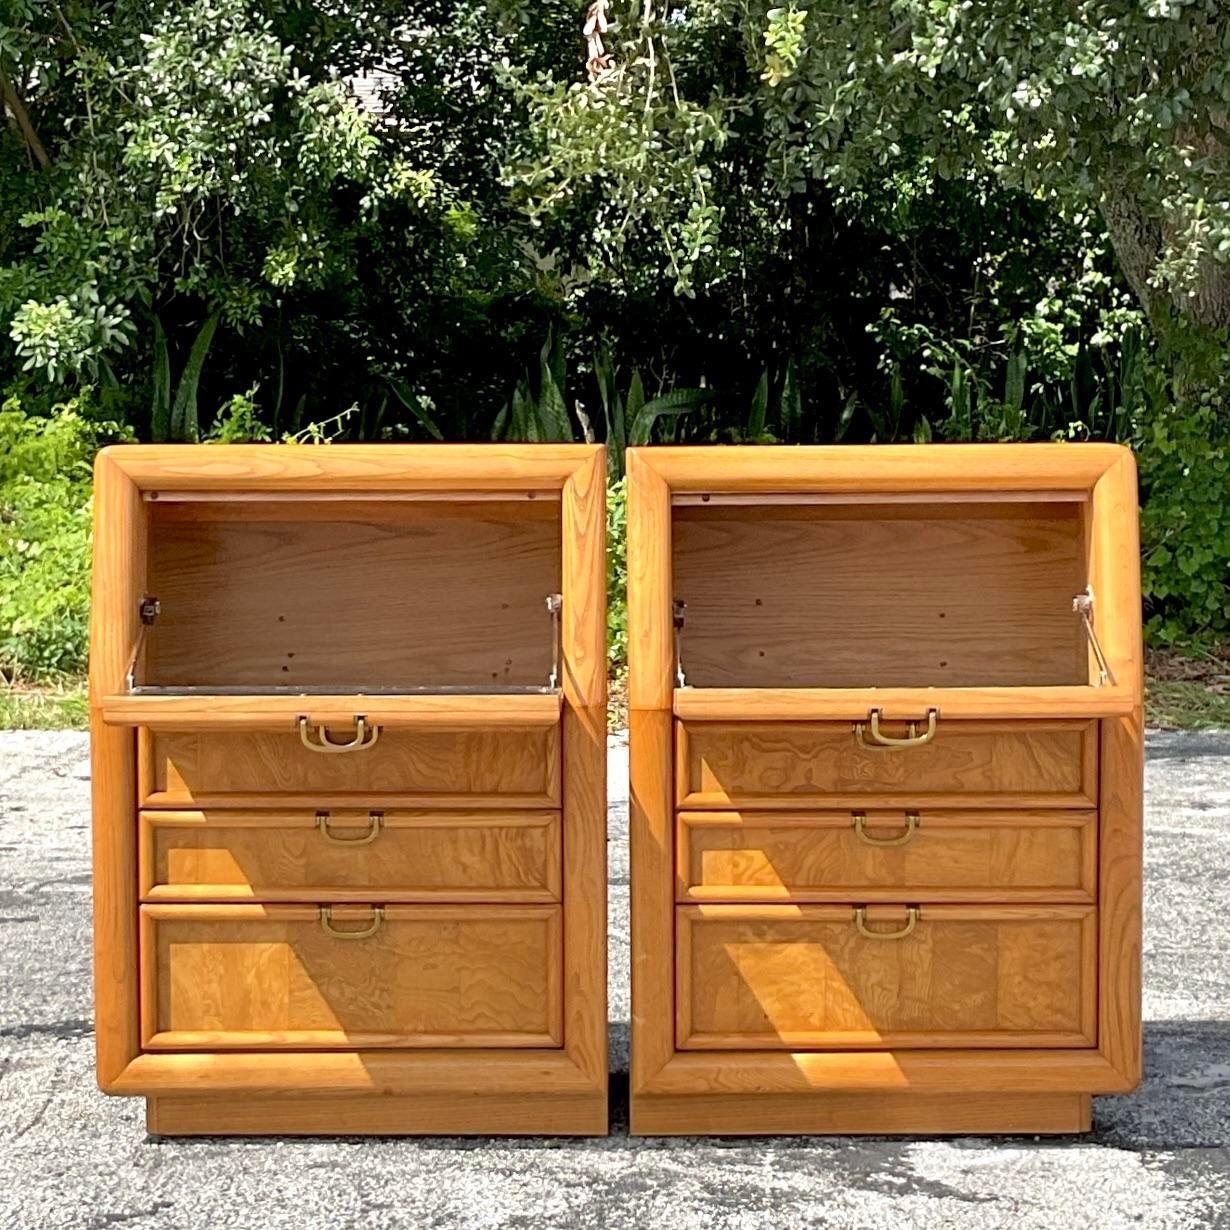 Late 20th Century Vintage Boho Broyhill Burl Wood Nightstands - a Pair In Good Condition For Sale In west palm beach, FL